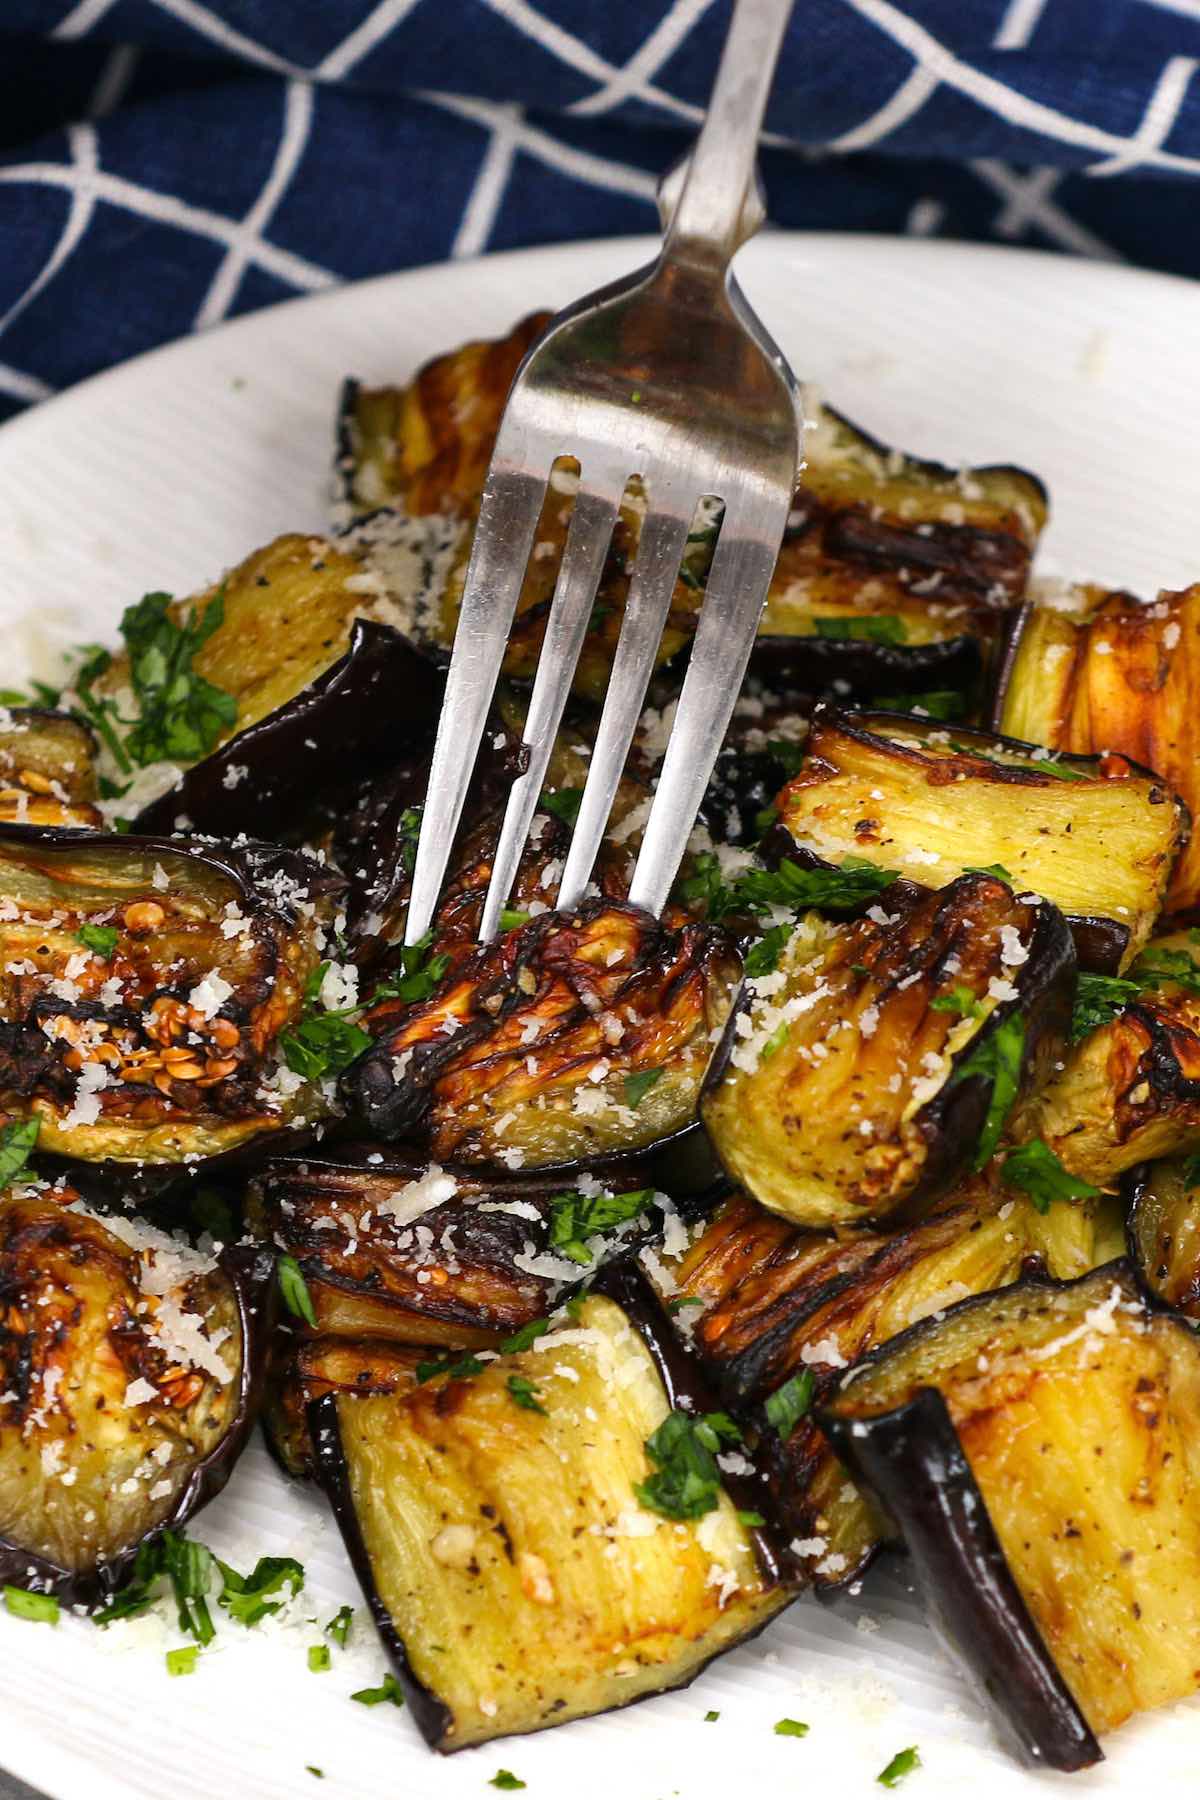 This Air Fryer Eggplant is a healthy and flavorful side dish that’s ready in under 20 minutes! Keep reading to learn how to roast eggplant in an air fryer quickly and easily.